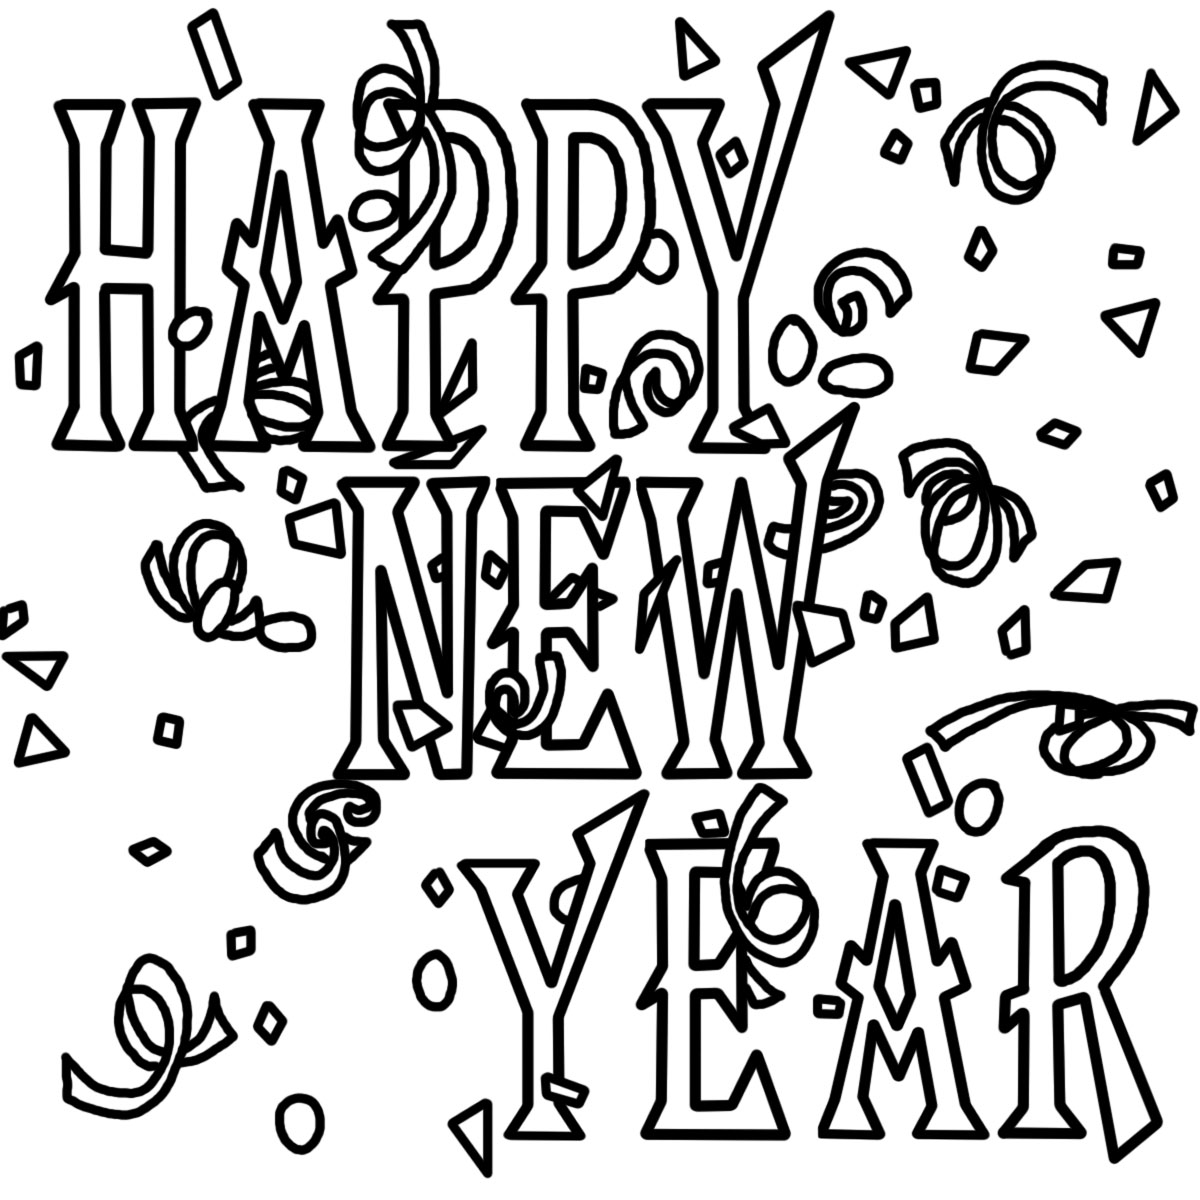 New Years Eve Clip Art Black And White Images & Pictures - Becuo